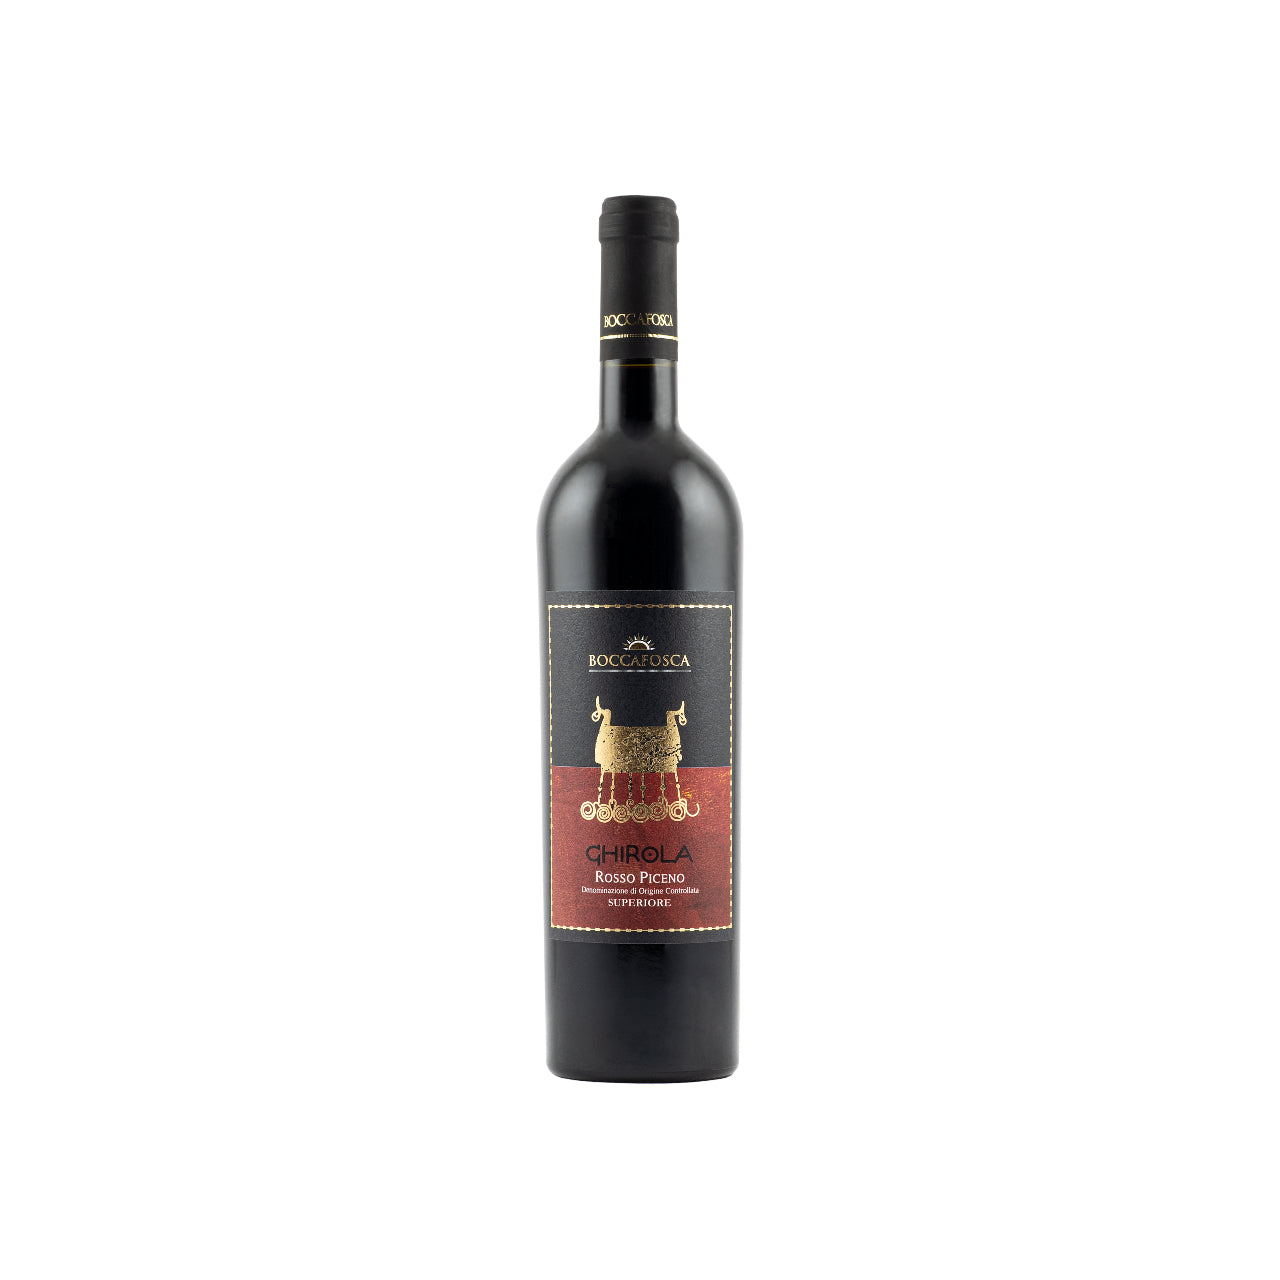 Ghirola Rosso Piceno DOC Sup.2017       750ml